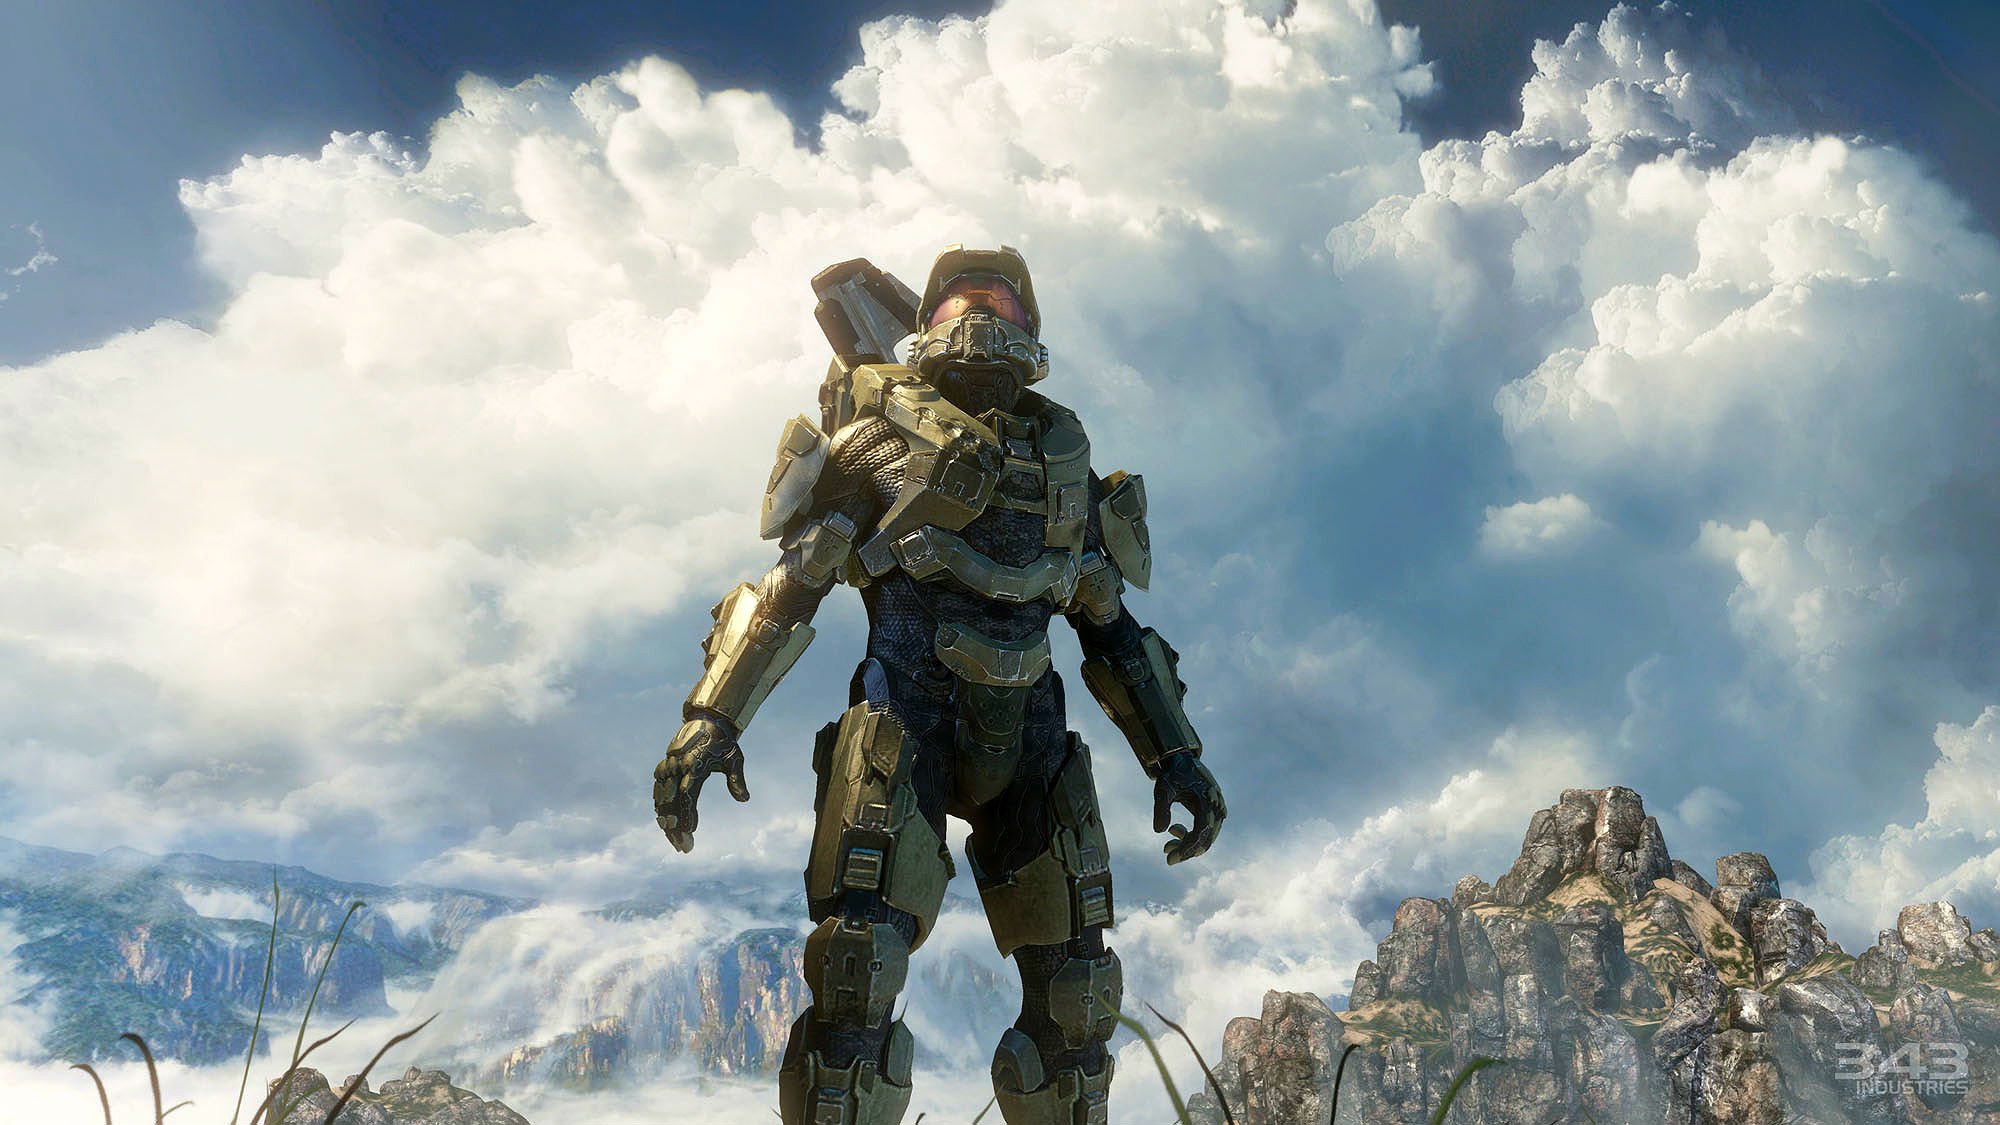 halo, Master, Chief, Collection, Sci fi, Shooter, Action, Futuristic, Fps, War, Fighting, 1halomasterchief, Warrior Wallpaper